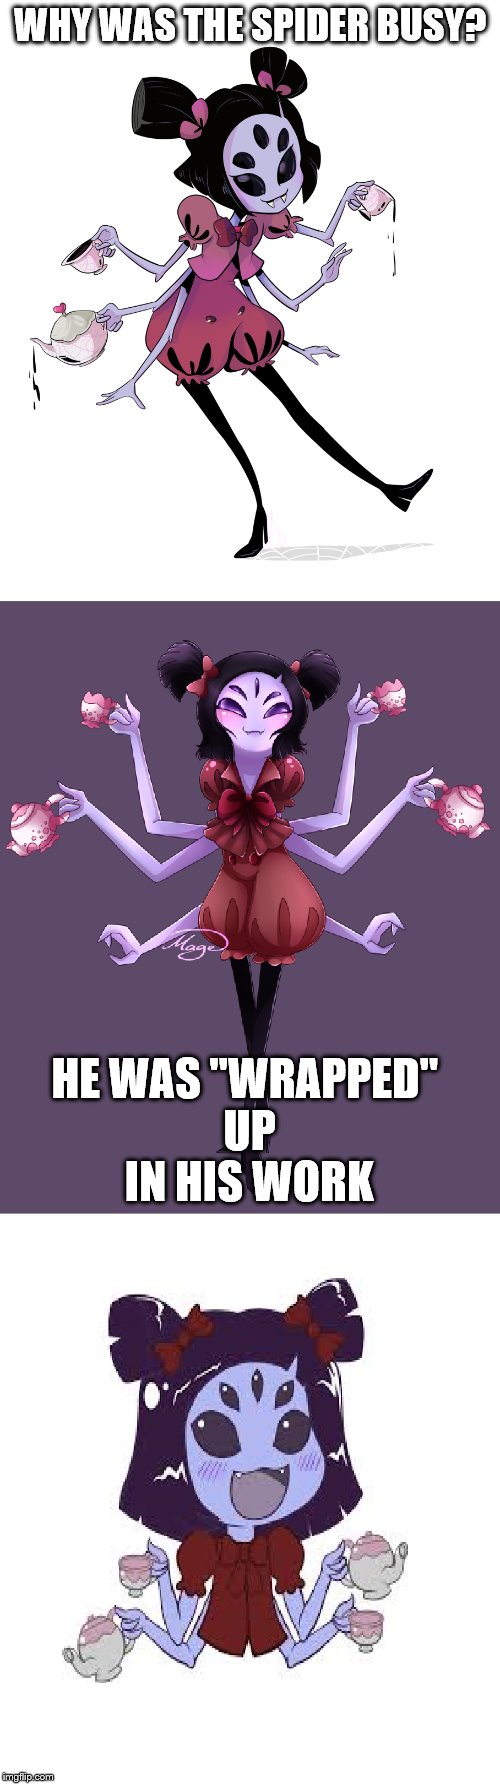 Here have a Muffet joke template | WHY WAS THE SPIDER BUSY? HE WAS "WRAPPED" UP IN HIS WORK | image tagged in muffet,spiderpuns | made w/ Imgflip meme maker